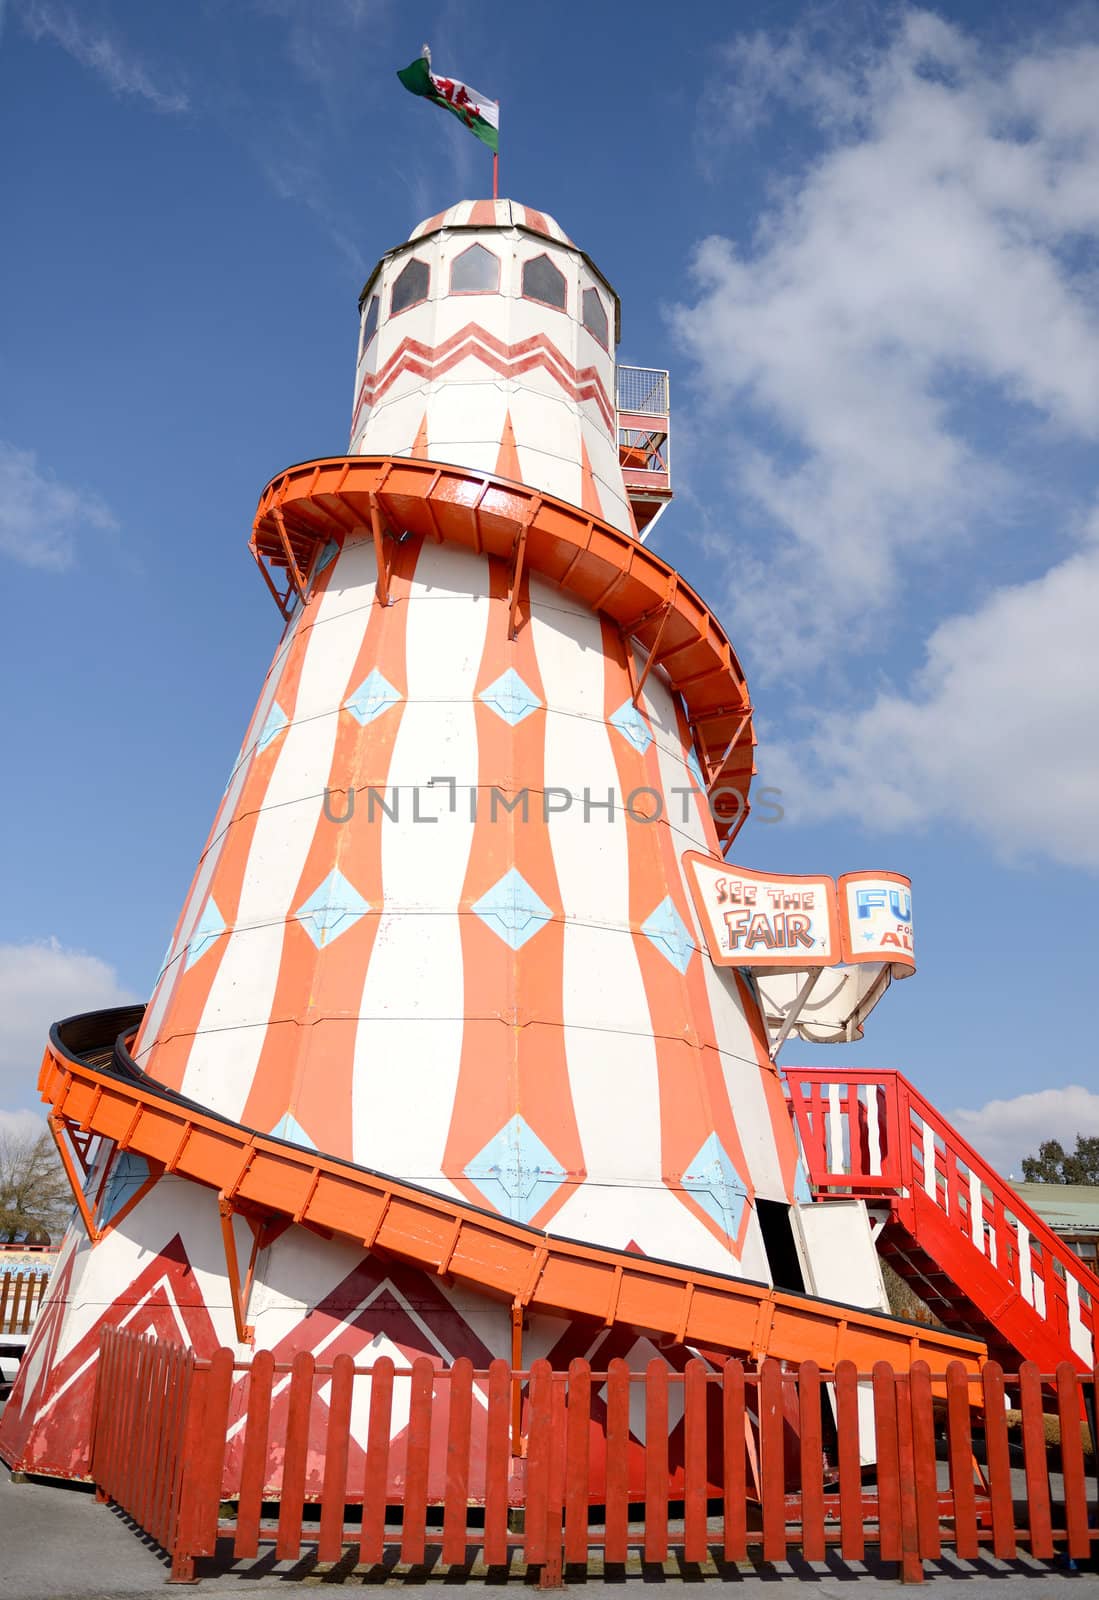 a fun helter skelter at a fairground on a sunny day